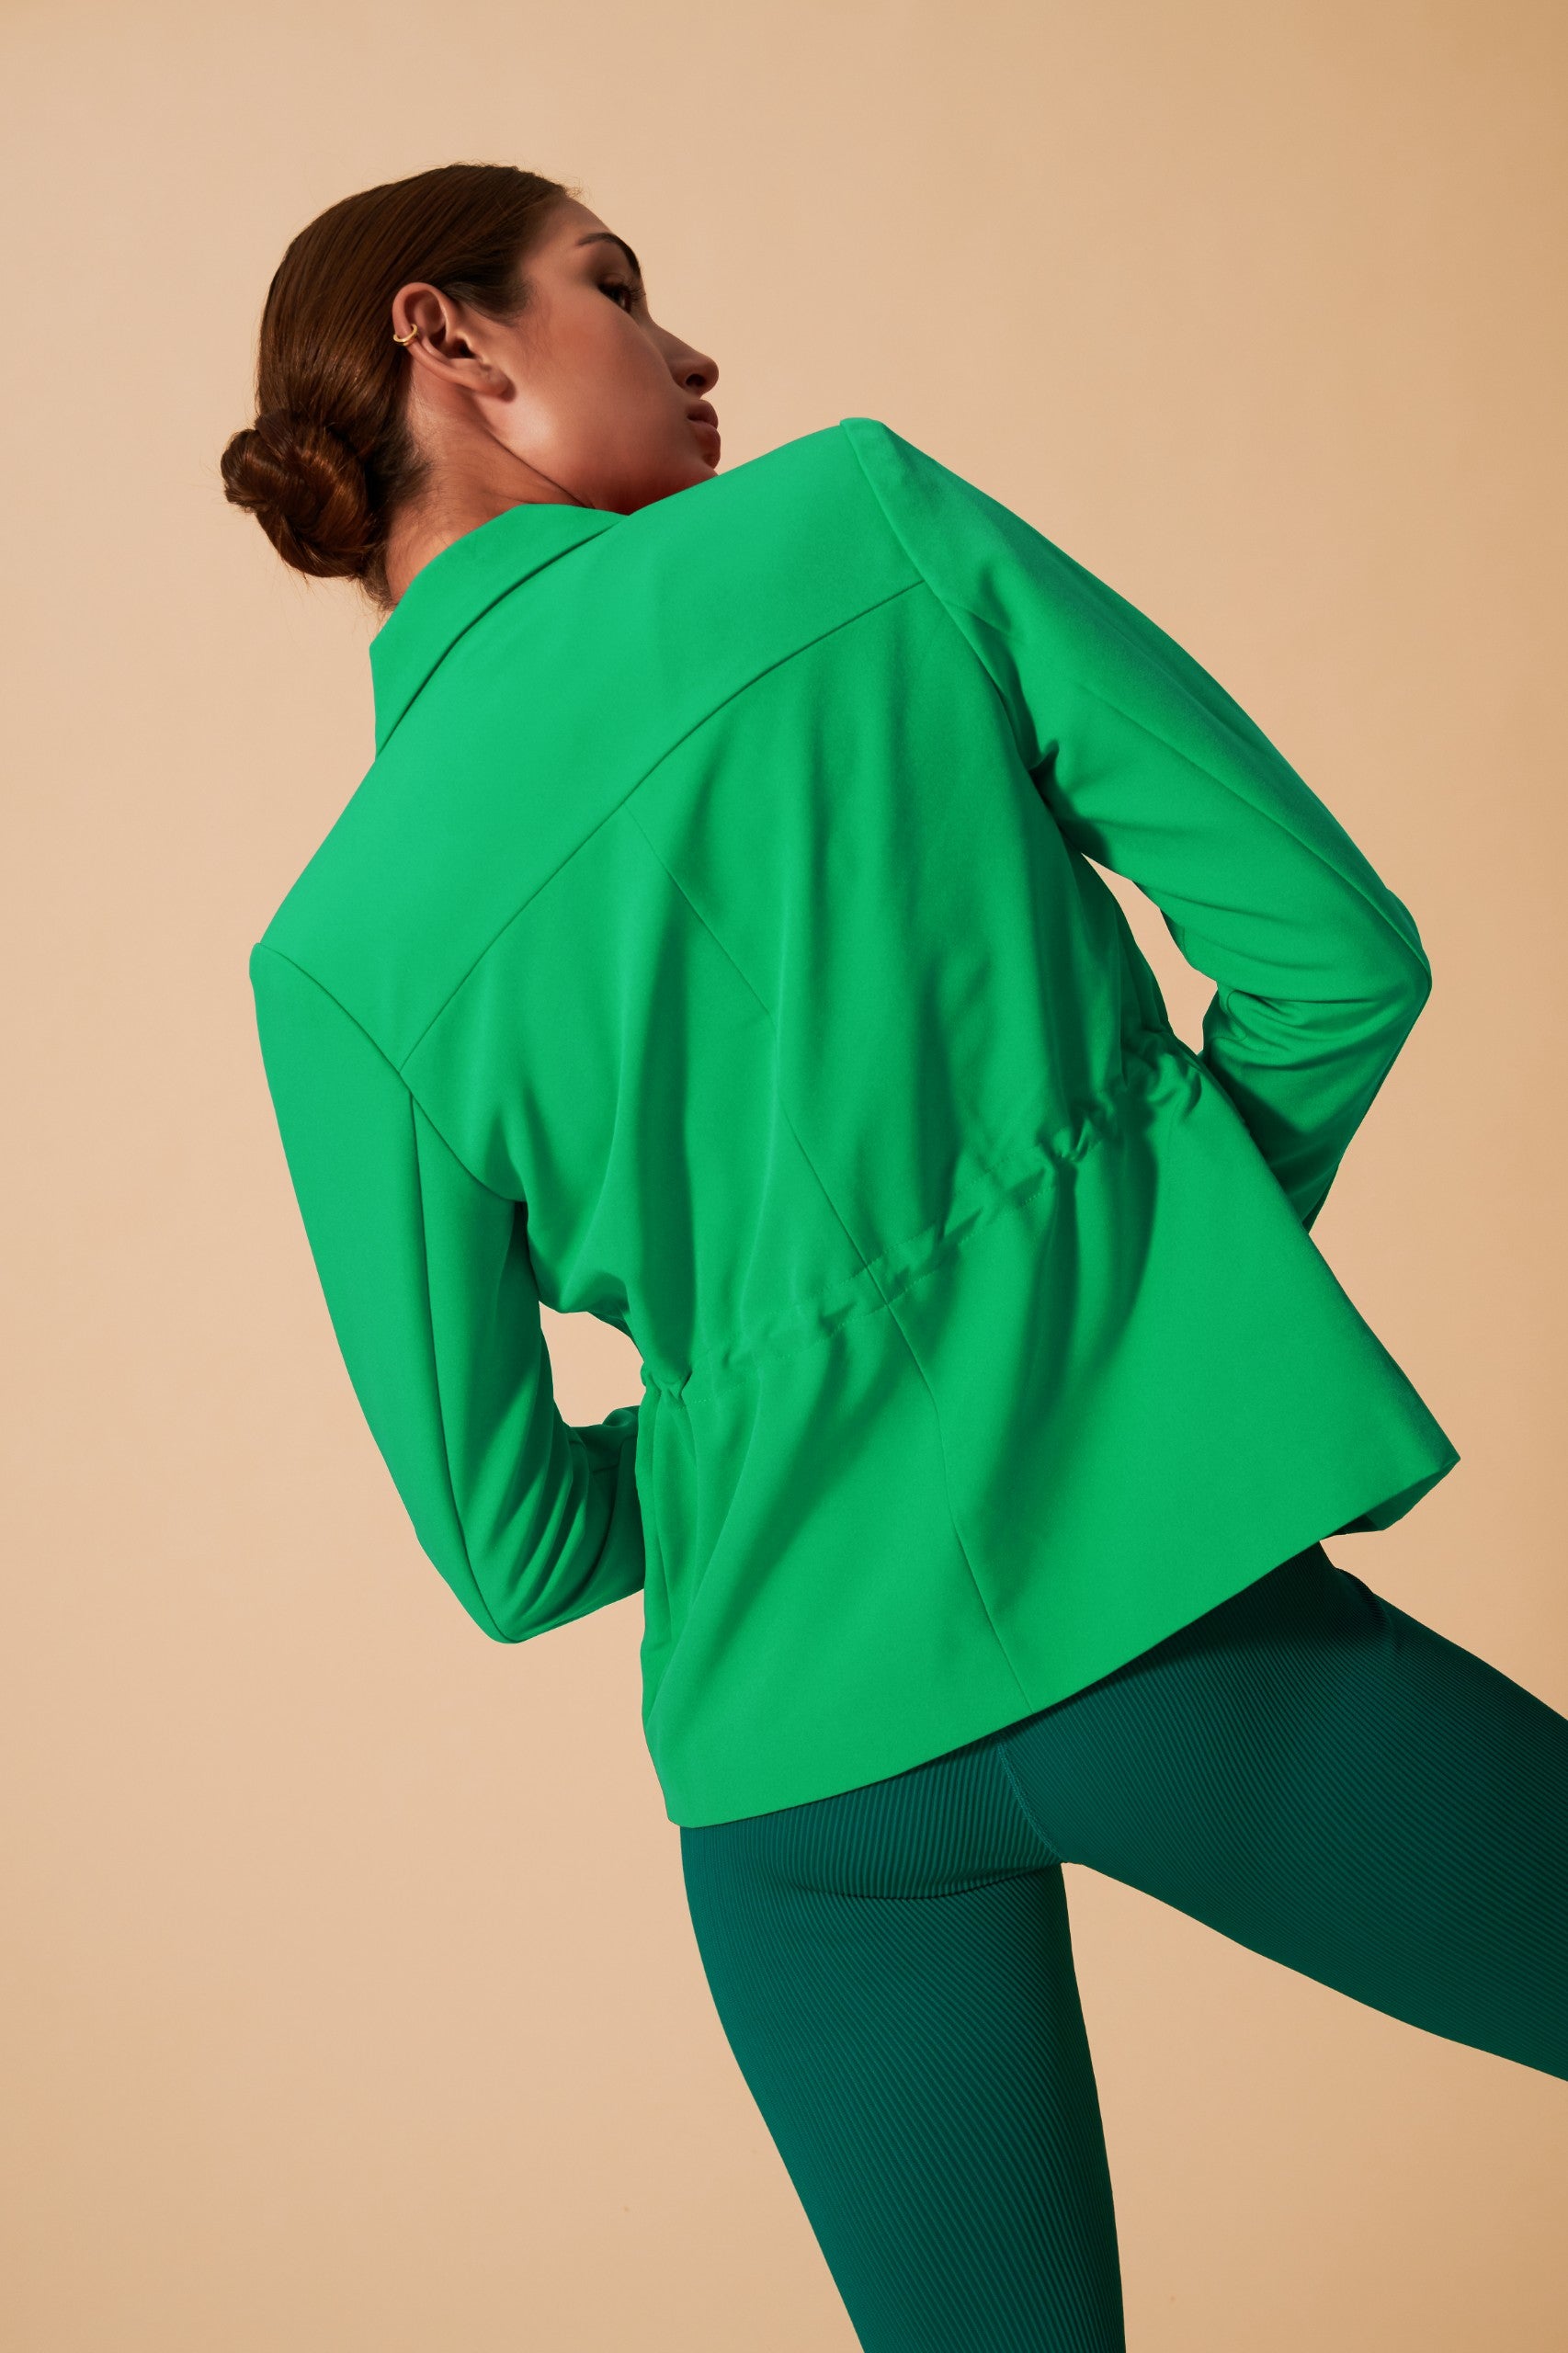 Stylish green women's blazer jacket with a touch of elegance - OW-0132-WJK-GN_1.jpg.